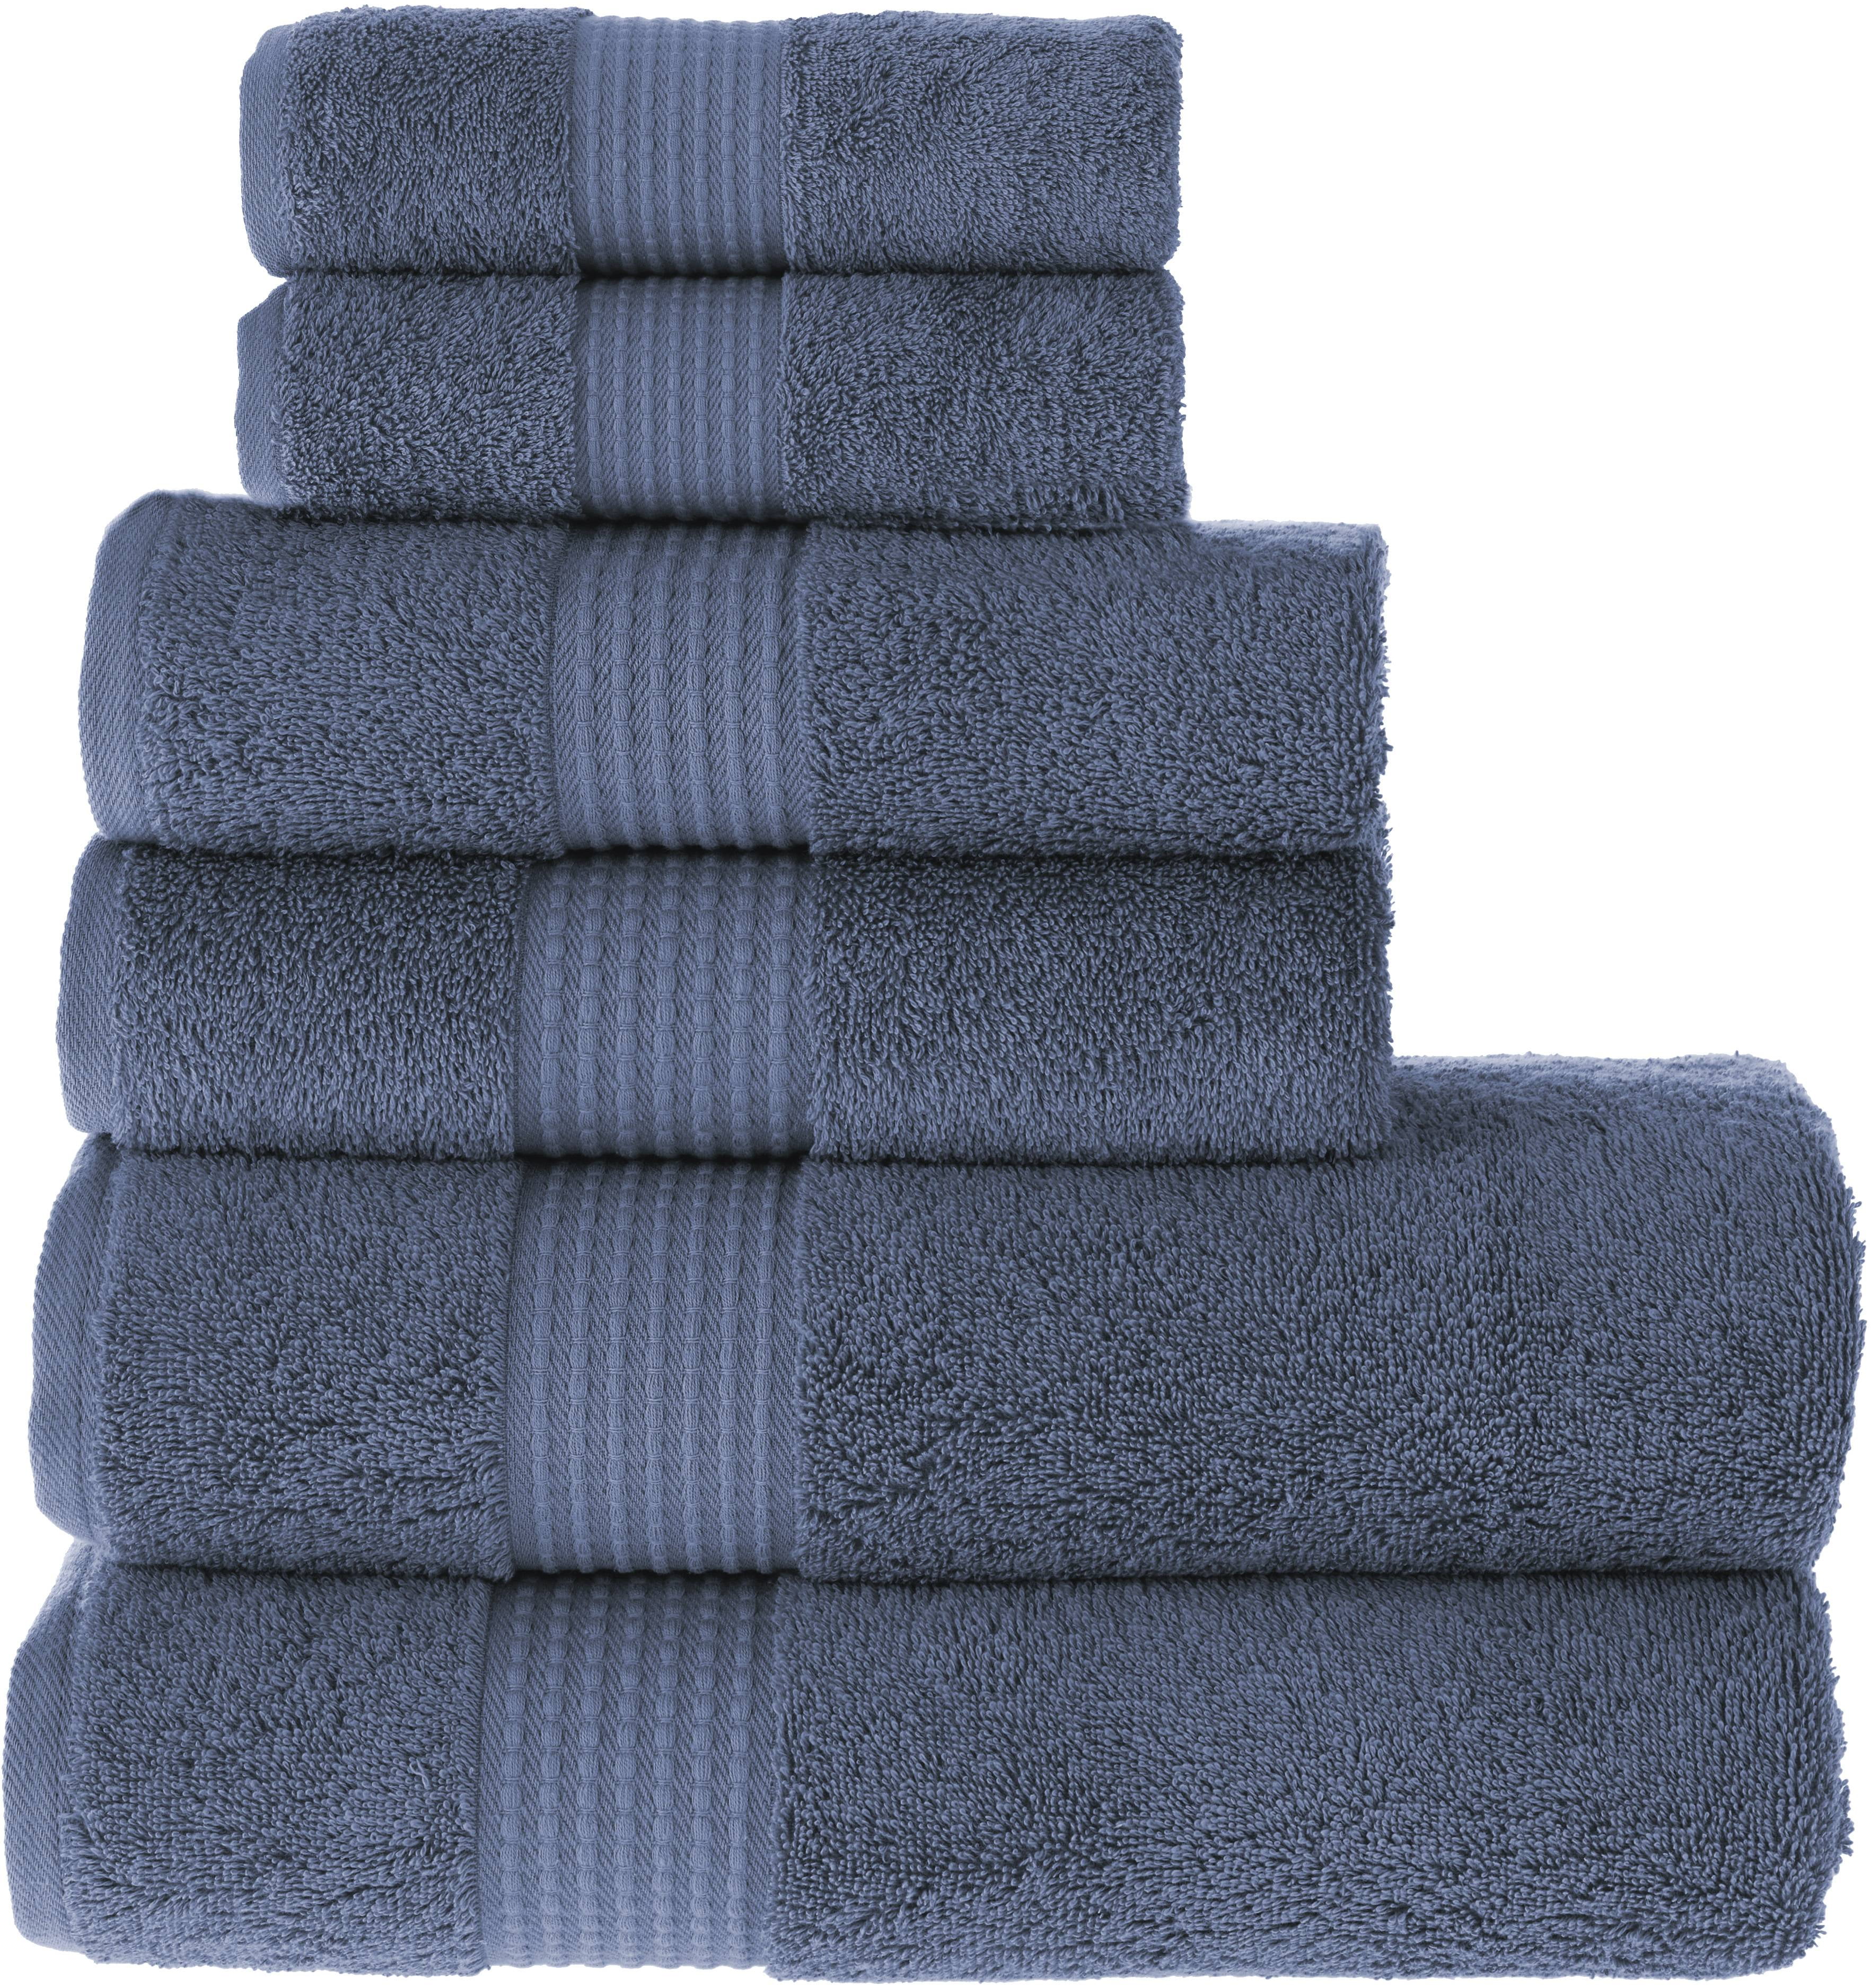 Maura 4 Piece Bath Towel Set. Extra Large 30x56 Premium Turkish Towels.  Thick, Soft, Plush and Highly Absorbent Luxury Hotel & Spa Quality Towels 